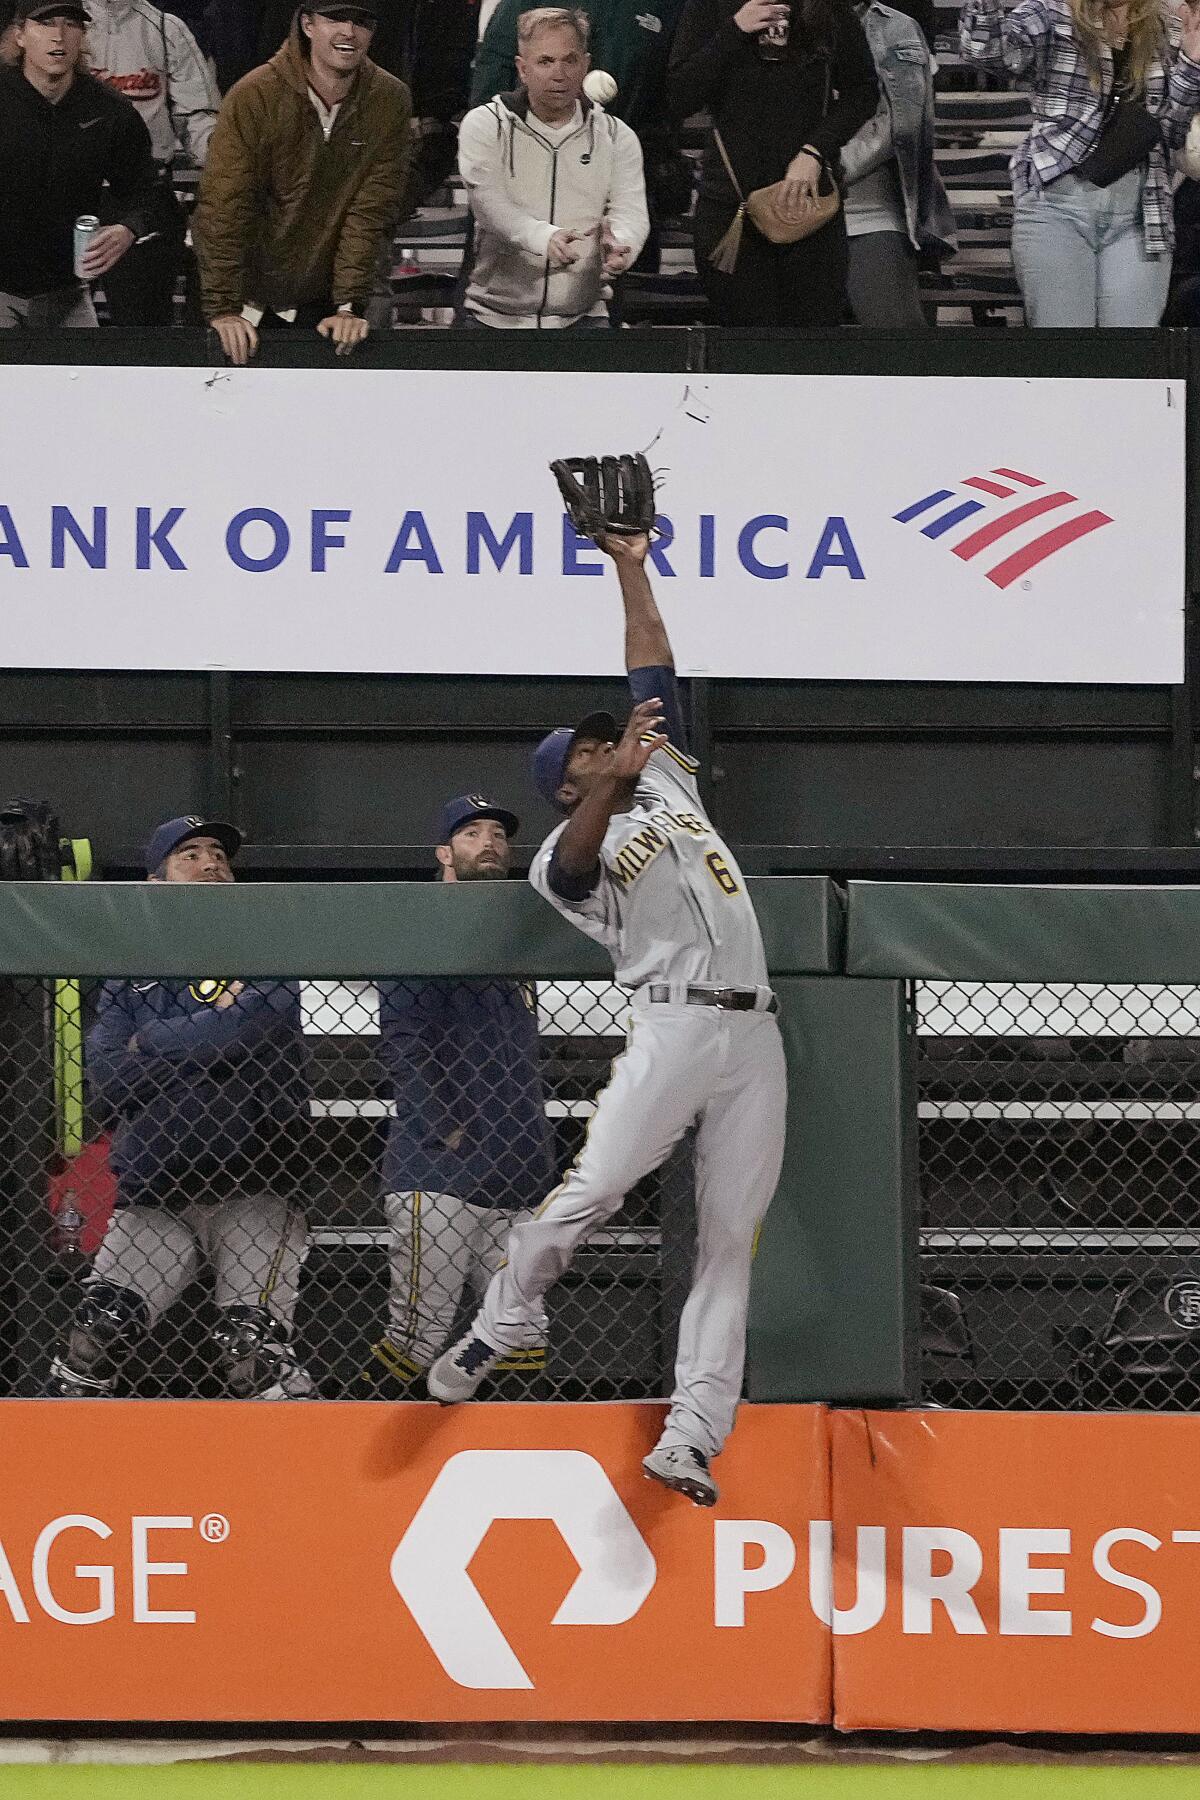 Milwaukee Brewers center fielder Lorenzo Cain leaps for but can't reach a solo home run by San Francisco Giants' Brandon Belt during the sixth inning of a baseball game Tuesday, Aug. 31, 2021, in San Francisco. (AP Photo/Tony Avelar)